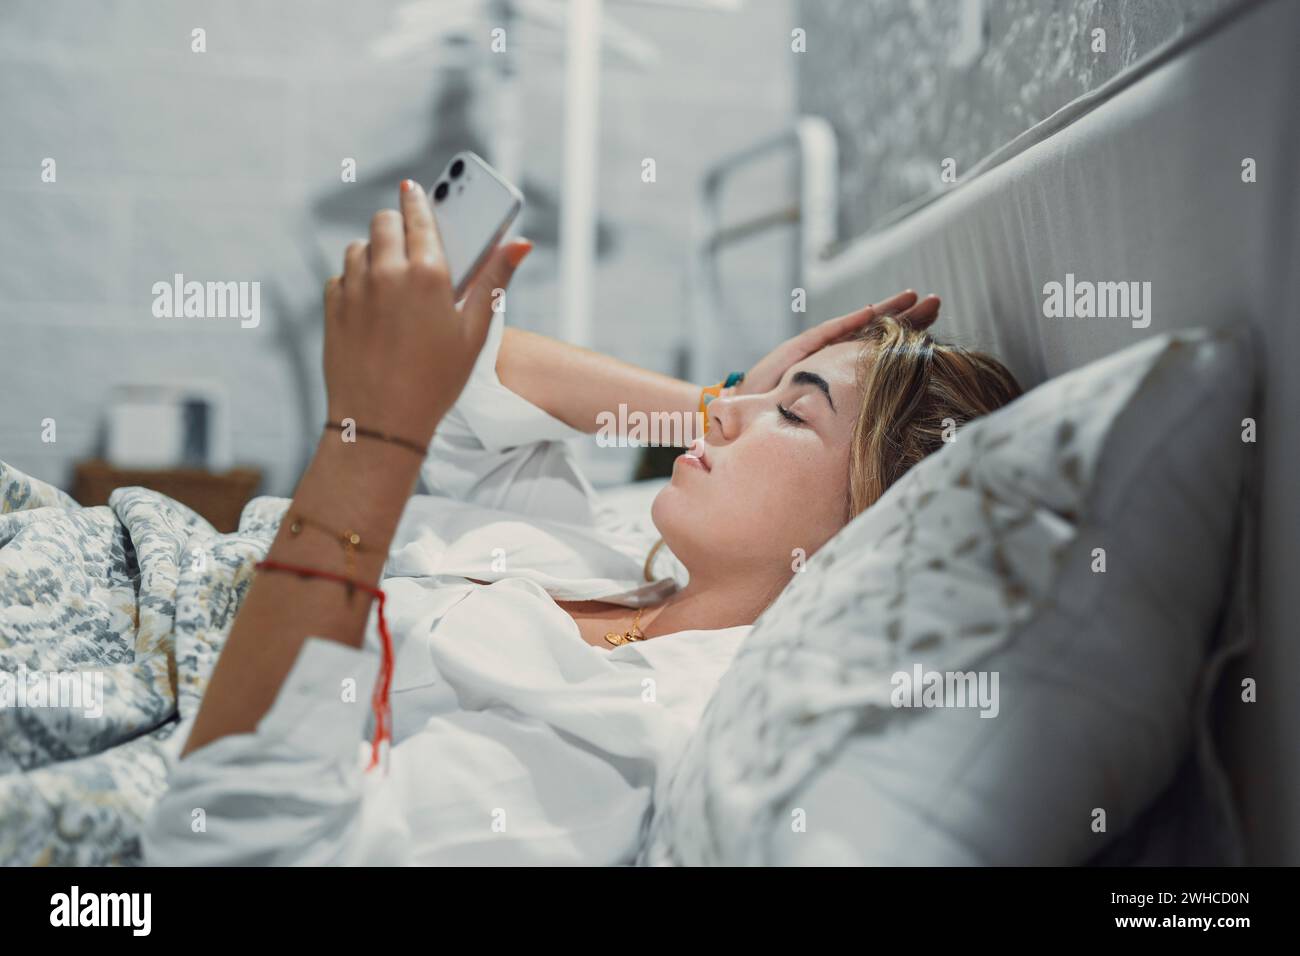 Top view unhappy woman feeling headache after sudden awakening by phone call, message signal or alarm in early morning, exhausted young female suffering from insomnia or migraine, lying in bed Stock Photo